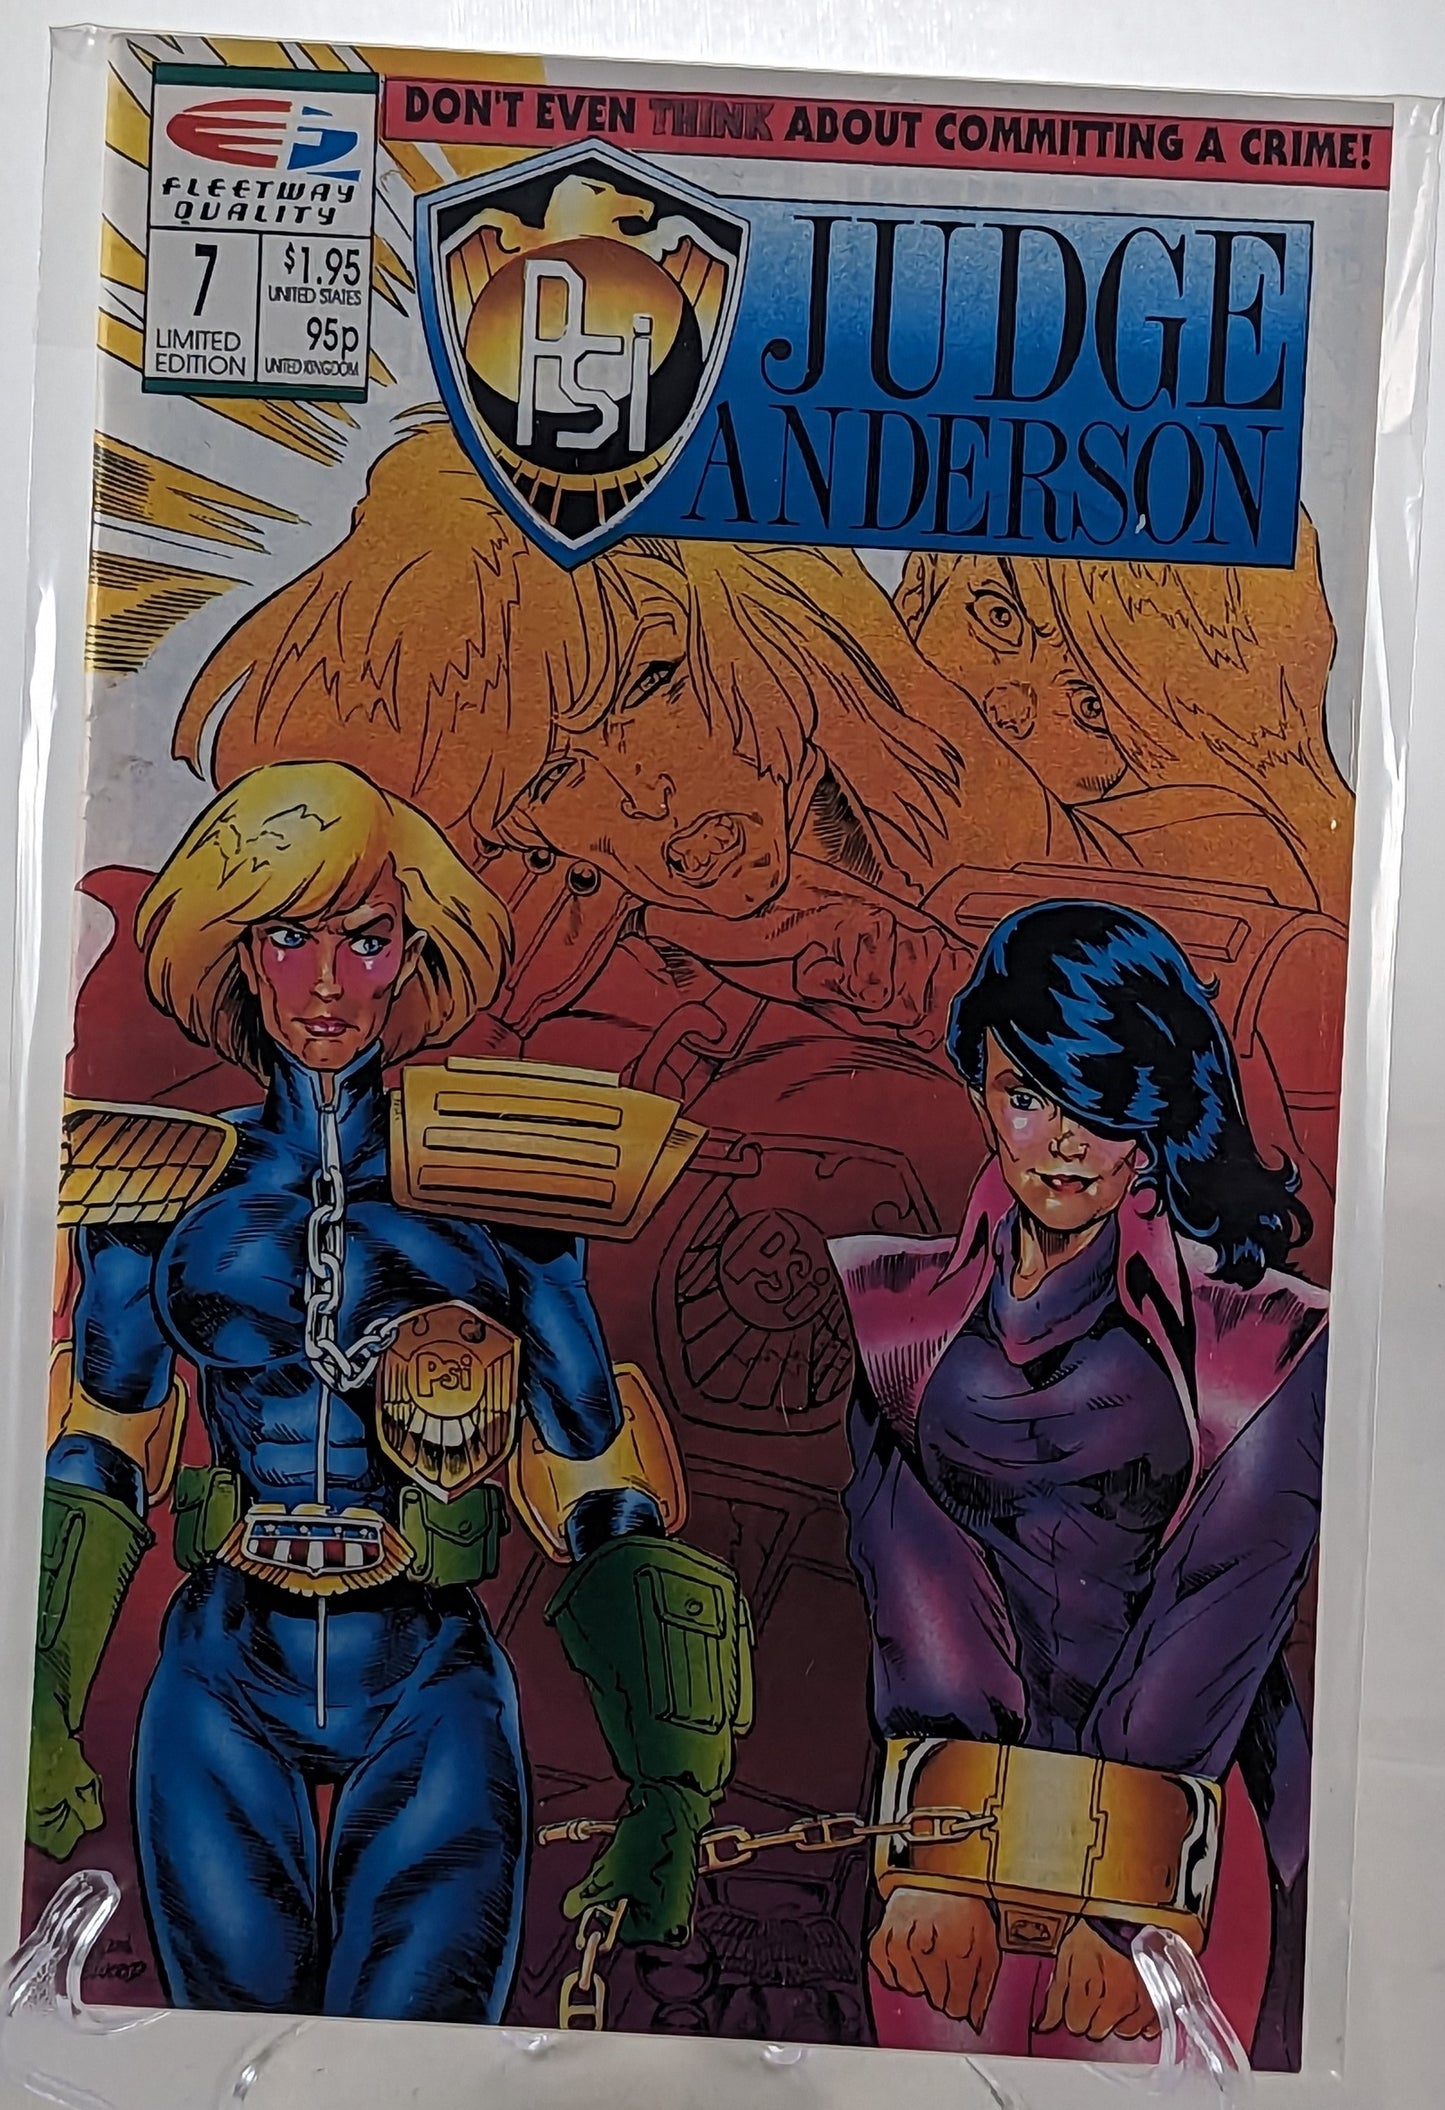 PSI Judge Anderson Limited Edition Issue 7 Fleetway Quality Comics